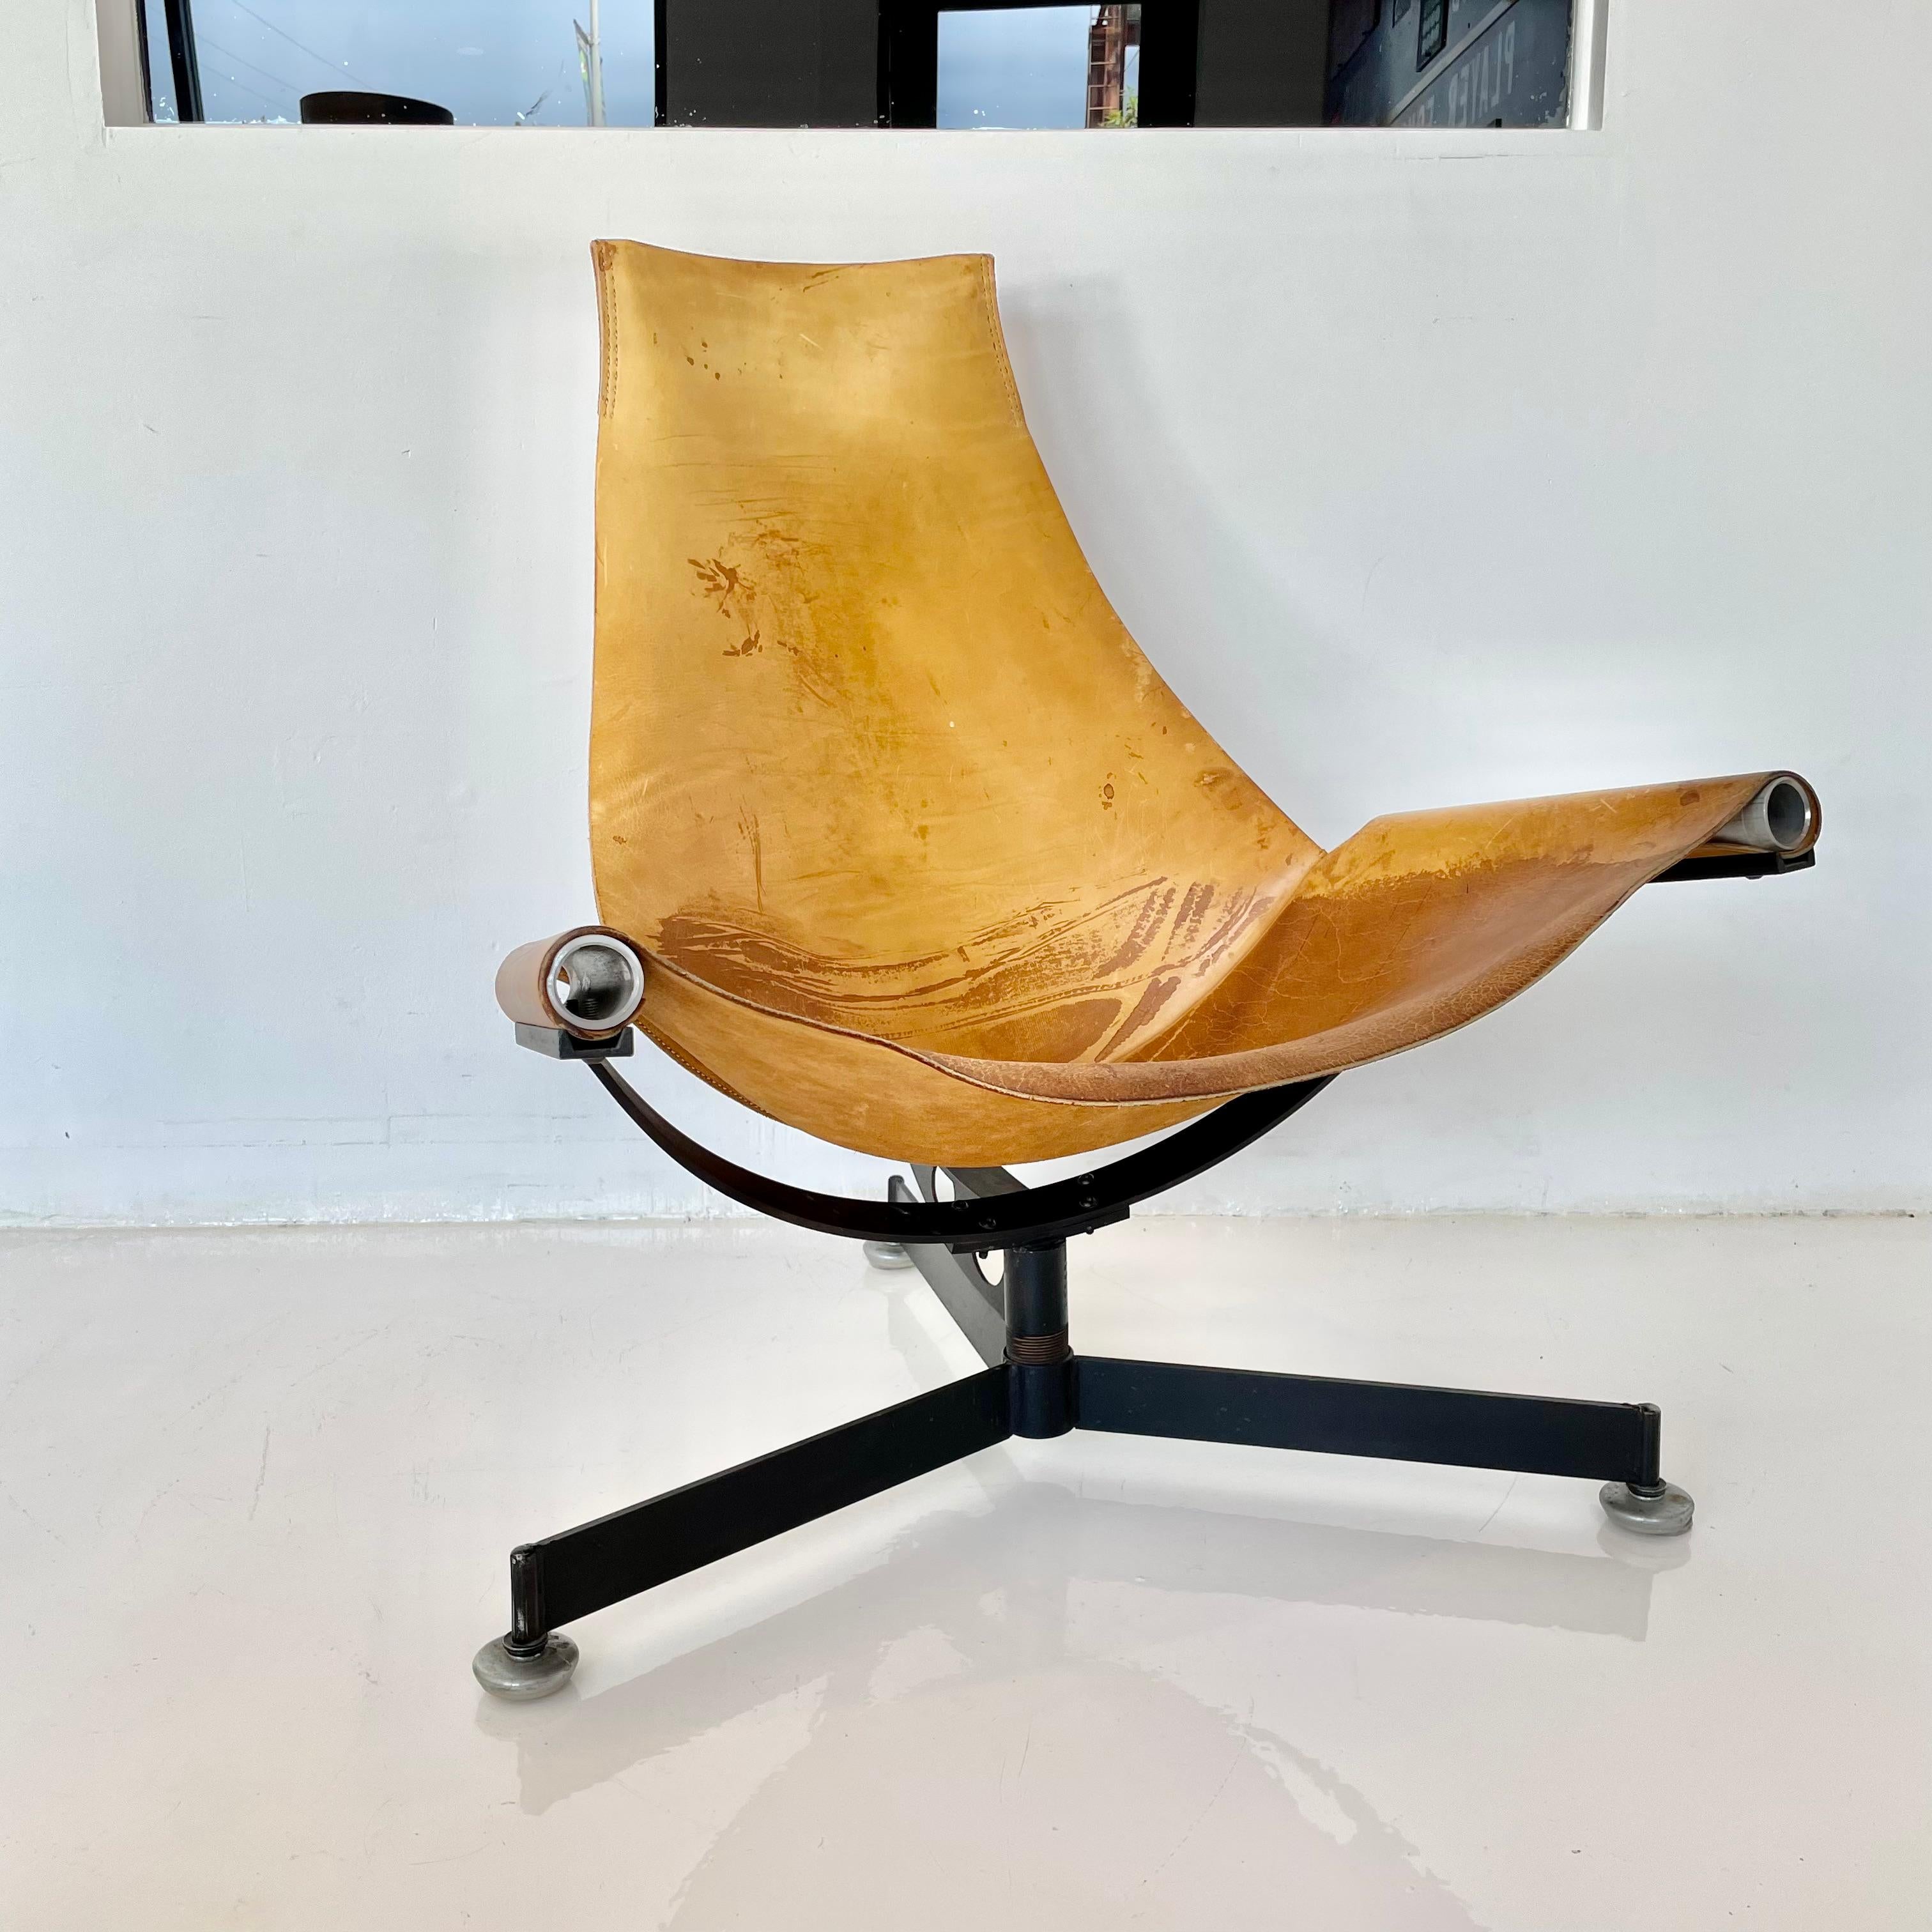 Sculptural iron and leather chair by Arizona native and industrial designer Max Gottschalk. Known for well proportioned work in natural materials with purposeful imperfections. Designed and created in the 1960s, the iron sling chair is his most